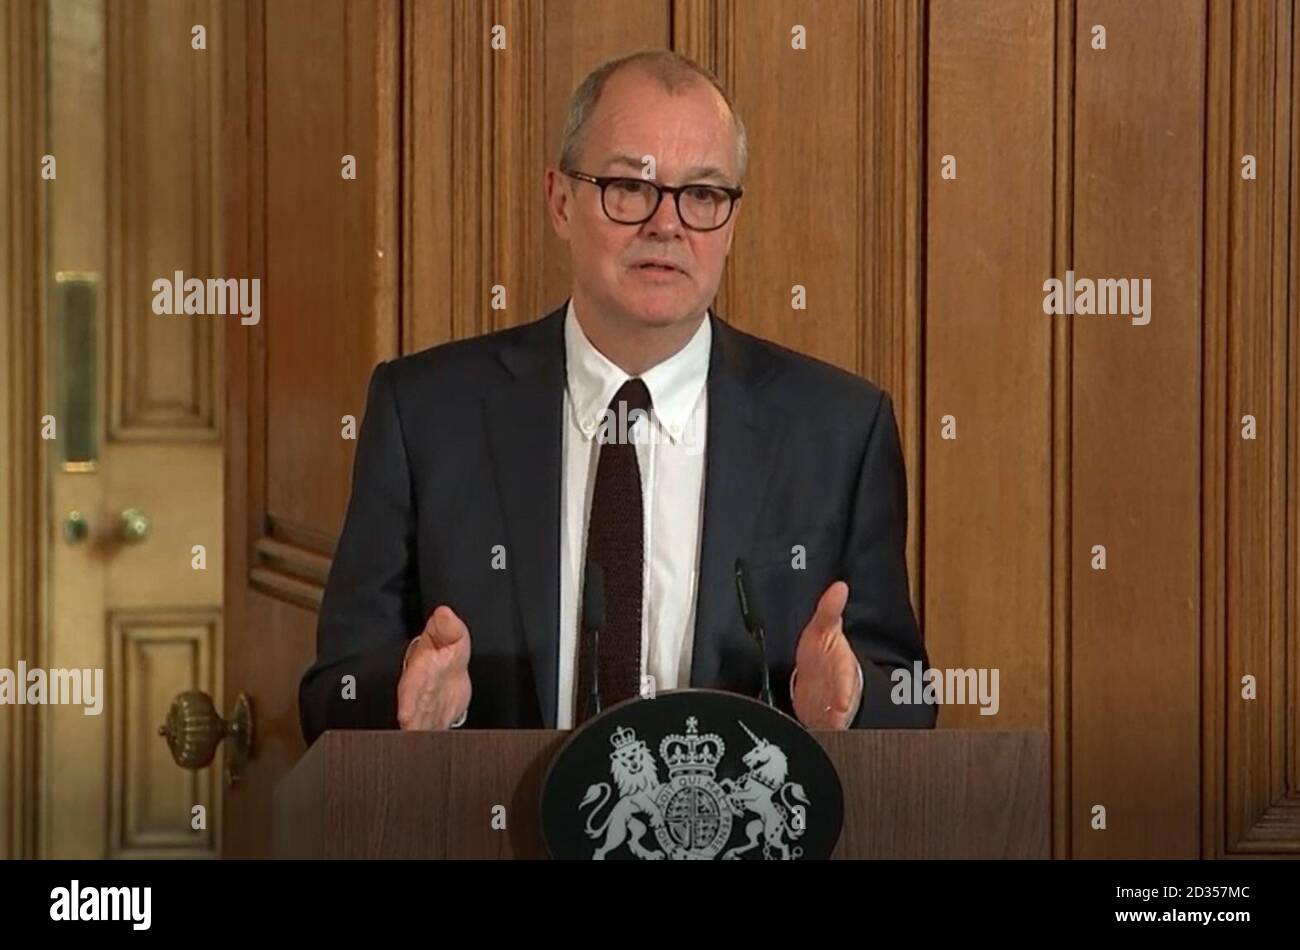 A screengrab taken from PA Video of Chief Scientific Adviser to the Government, Sir Patrick Vallance, speaking during a press conference on the government's coronavirus action plan, at 10 Downing Street, London. Stock Photo